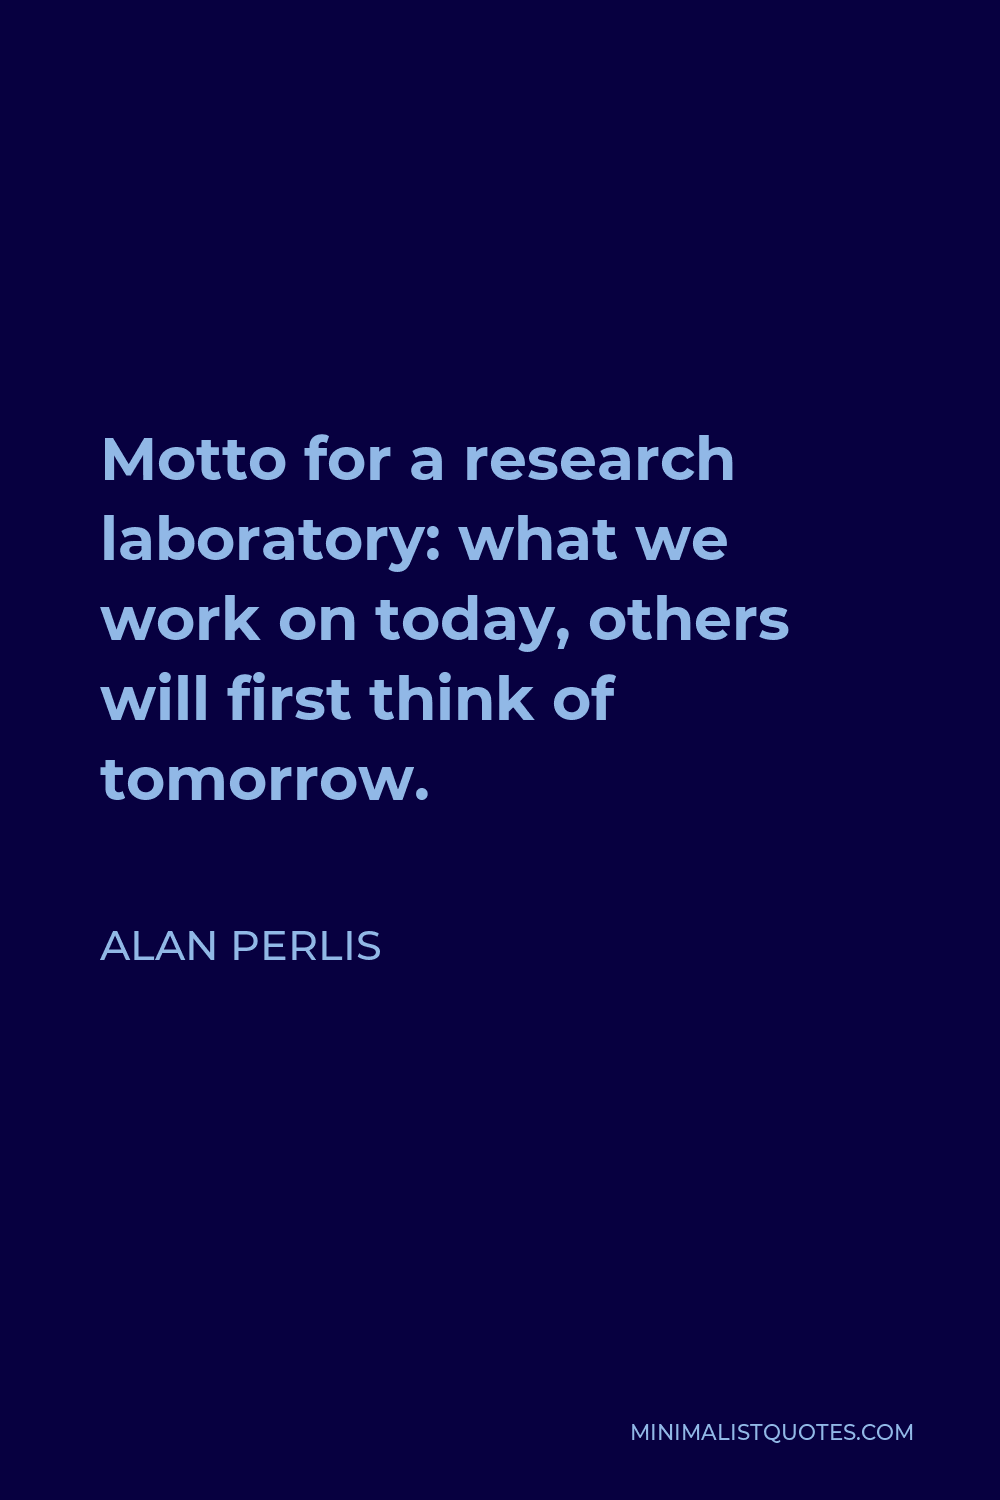 Alan Perlis Quote - Motto for a research laboratory: what we work on today, others will first think of tomorrow.